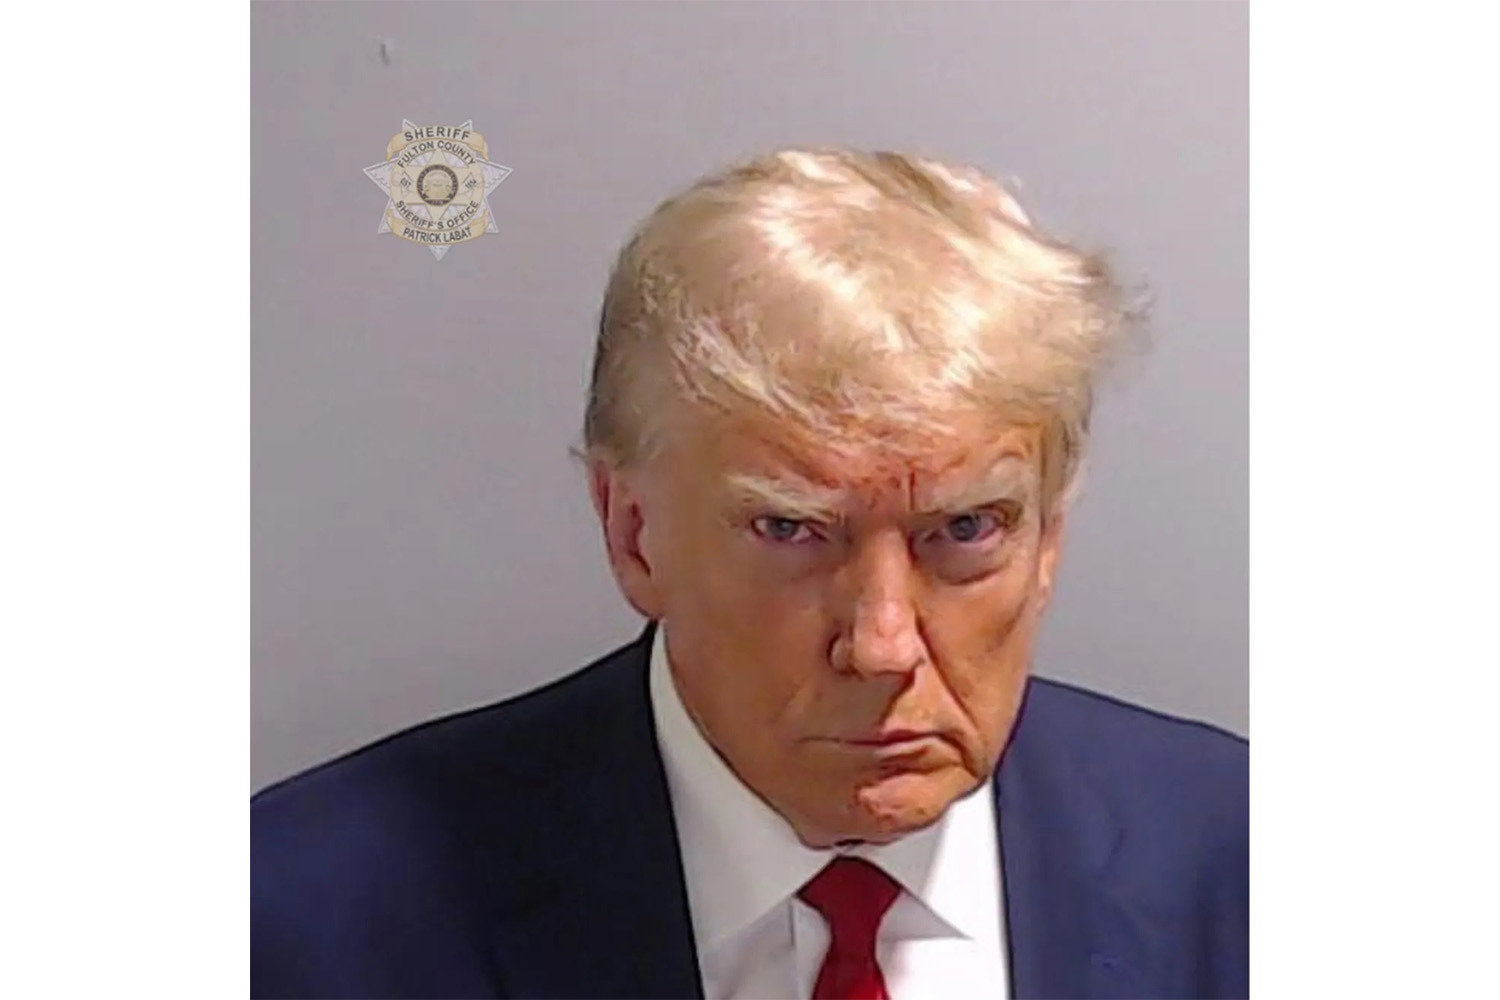 Aug 24, 2023; Atlanta, GA, USA; This handout booking photo provided by the Fulton County Sheriffs Office shows Donald Trump after he surrendered and was booked. Former President Donald Trump, and 18 others were indicted on 41 charges related to their efforts to overturn the 2020 US Presidential election.